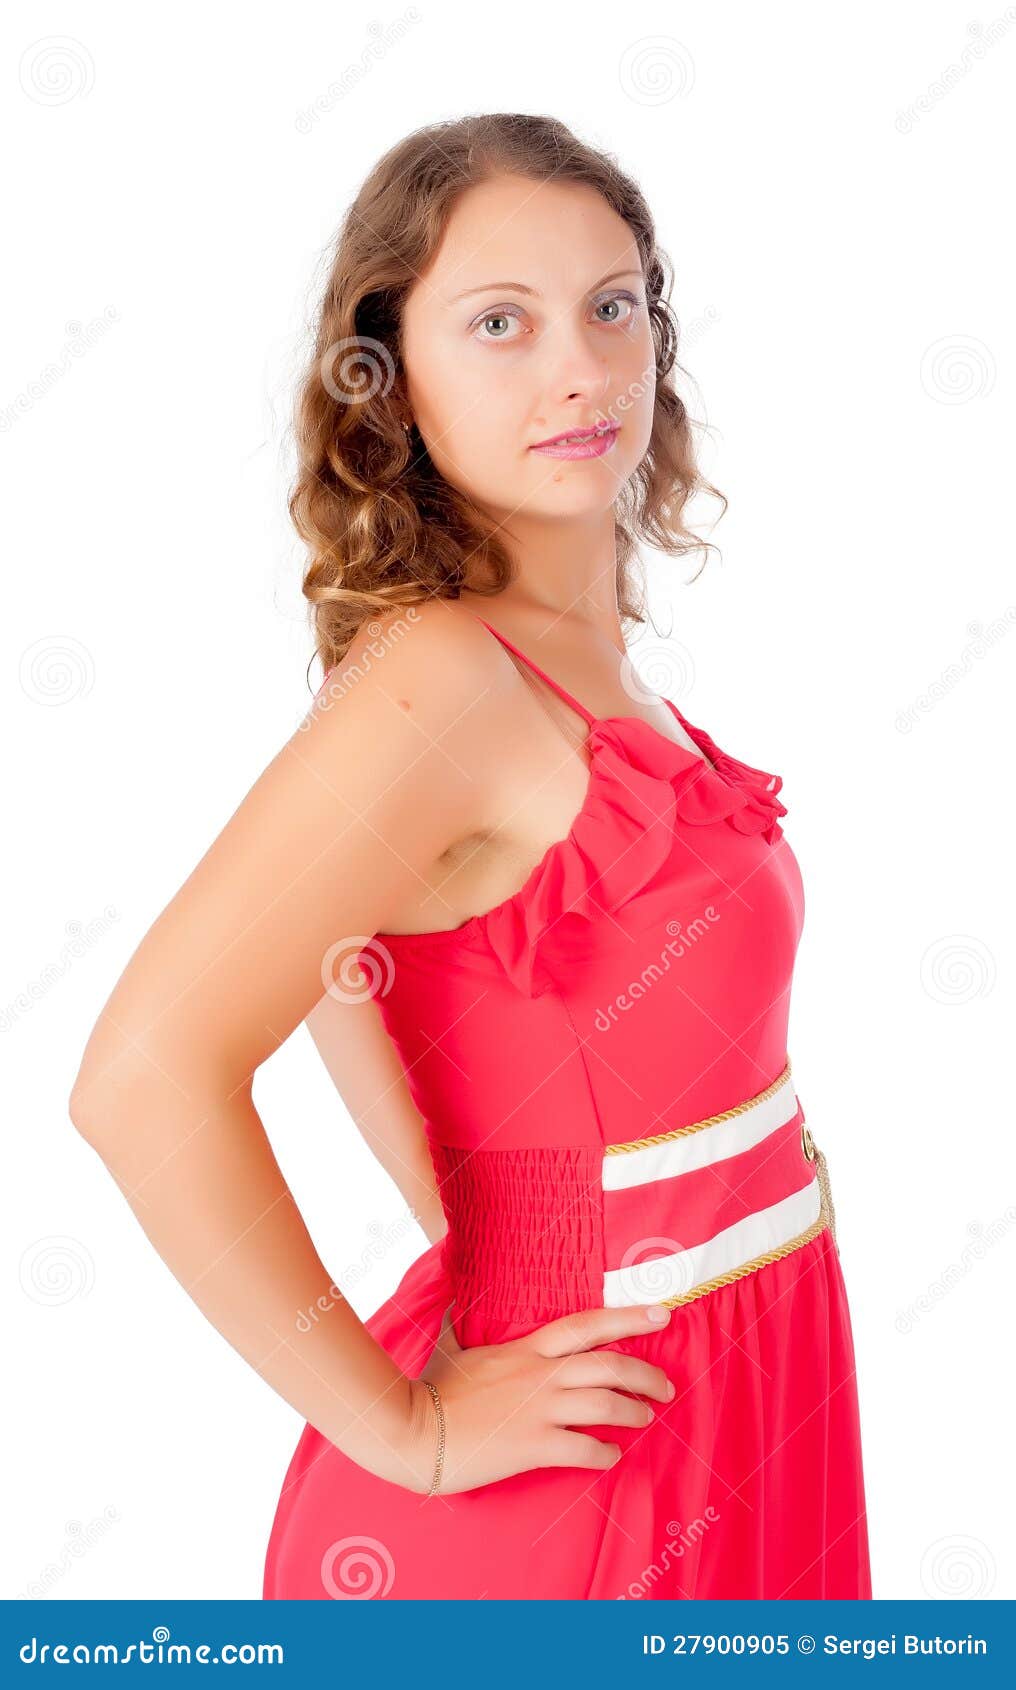 Seductive Blonde Woman With Red Dress Royalty Free Stock